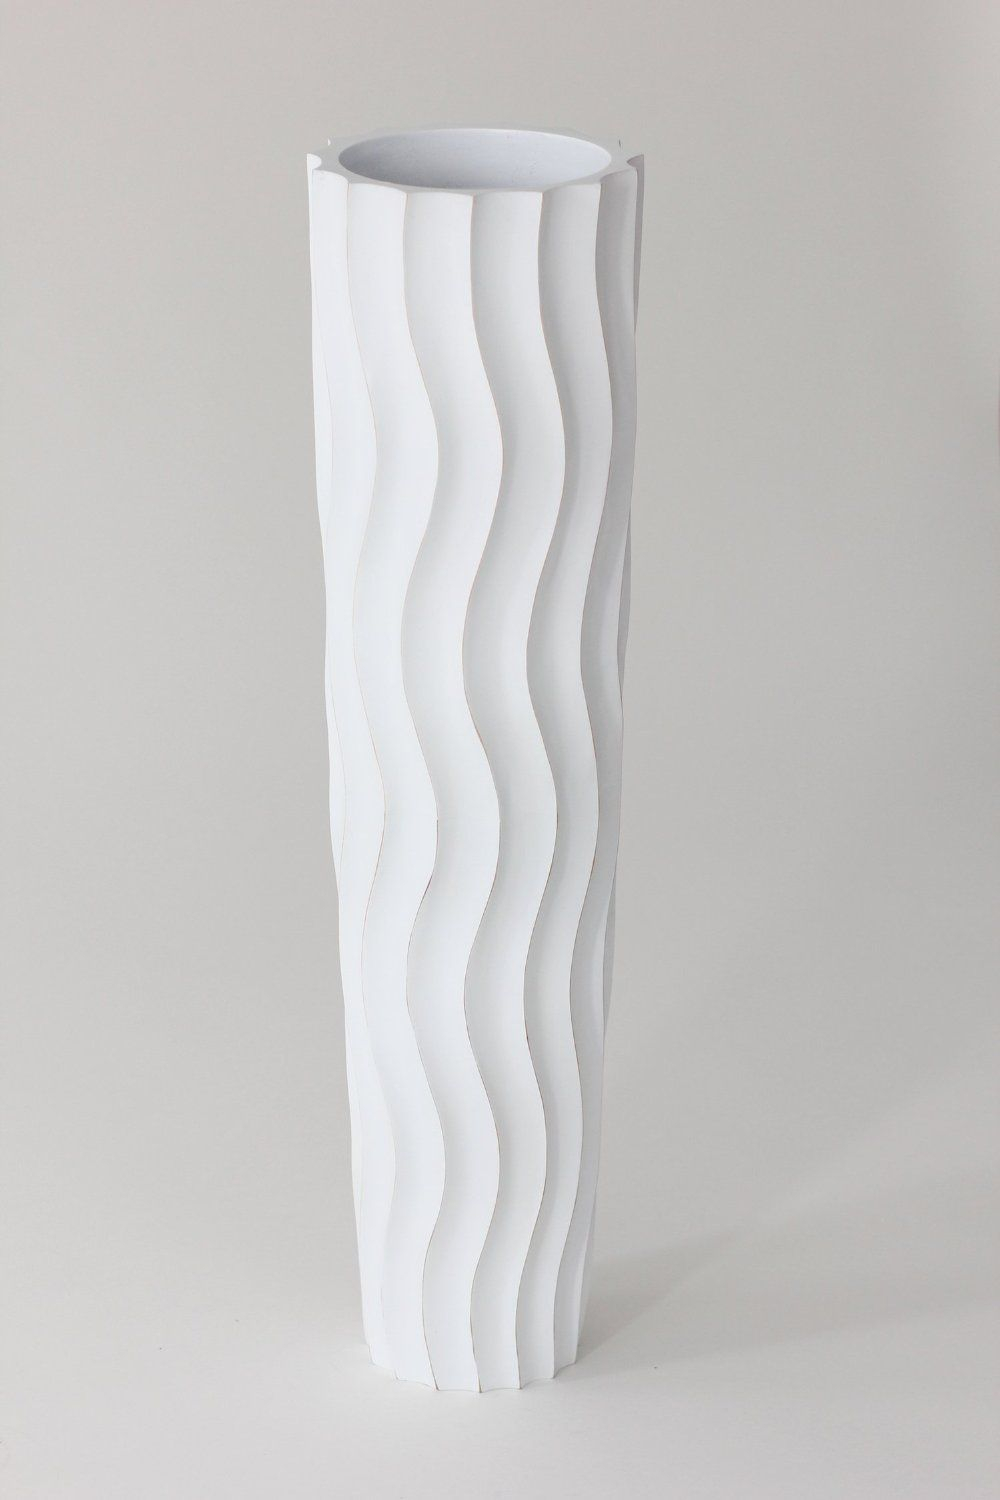 Tall Floor Vase 75 Cm Mango Wood White Amazoncouk in proportions 1000 X 1500